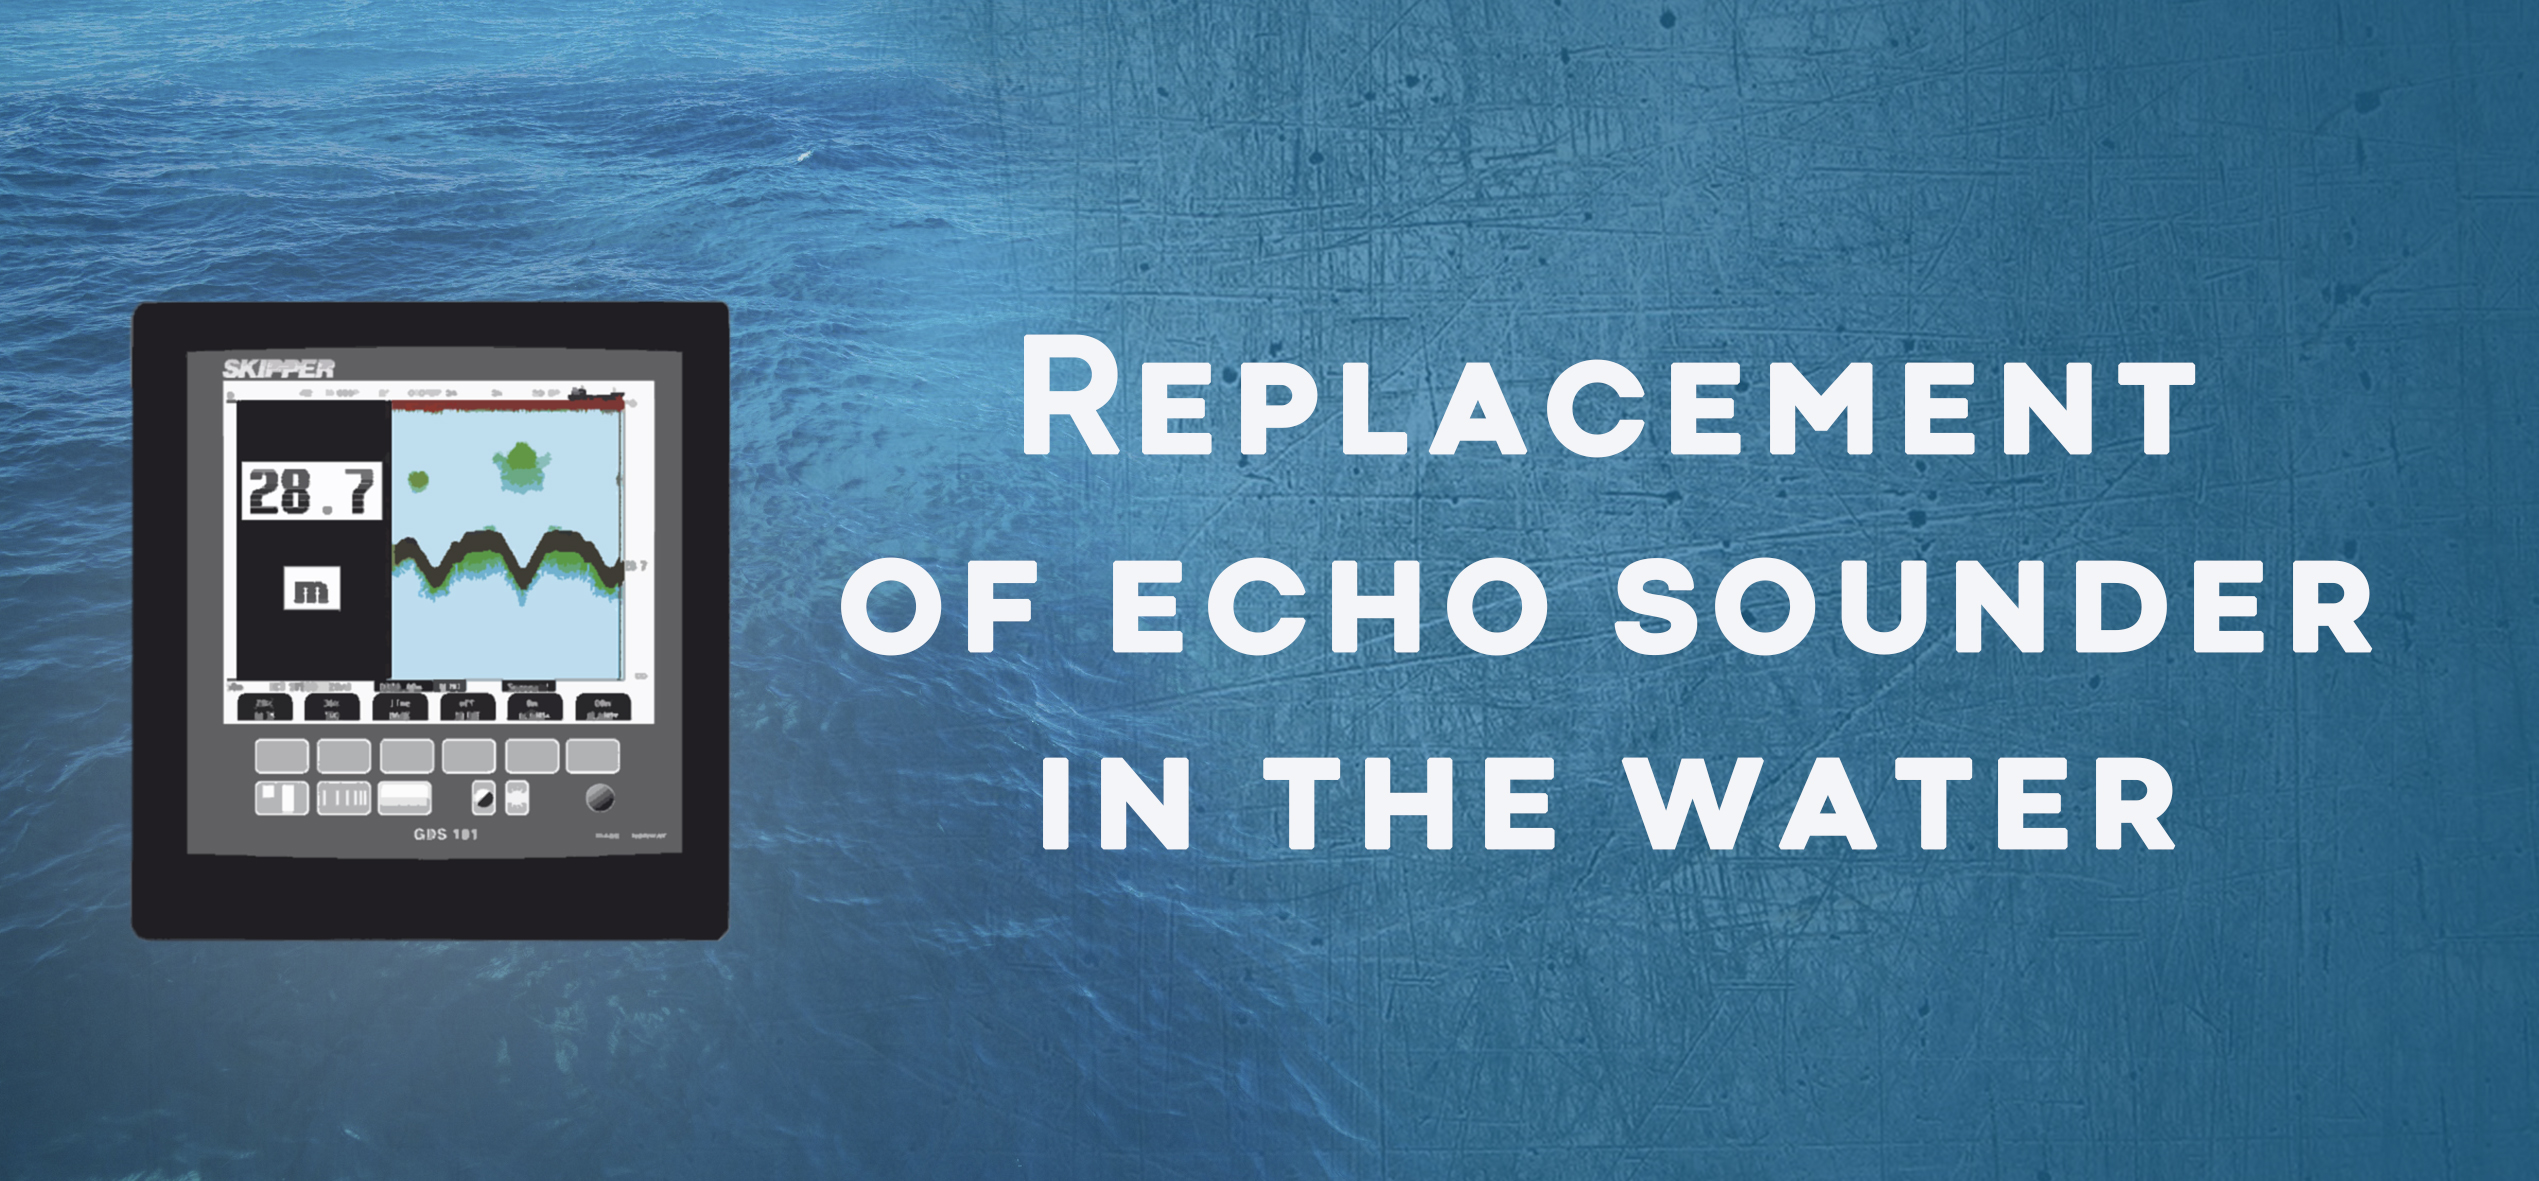 Replacement of echo sounder in the water